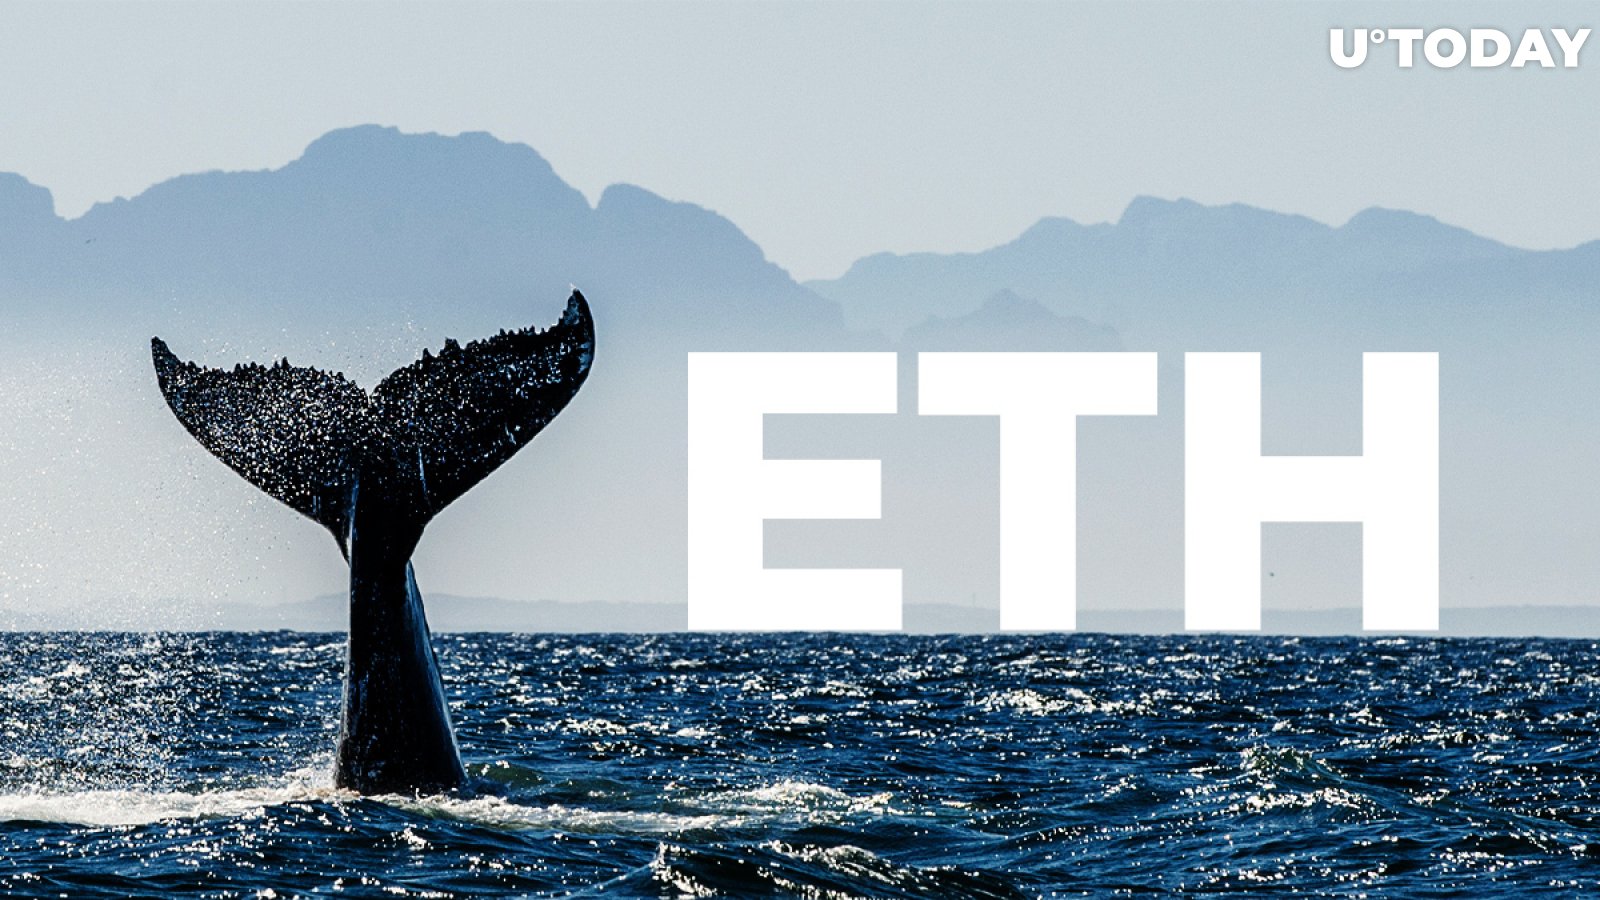 Mid-Sized Whales Are Dumping ETH, While Smaller Holders Are Acquiring It, Here's What It Means